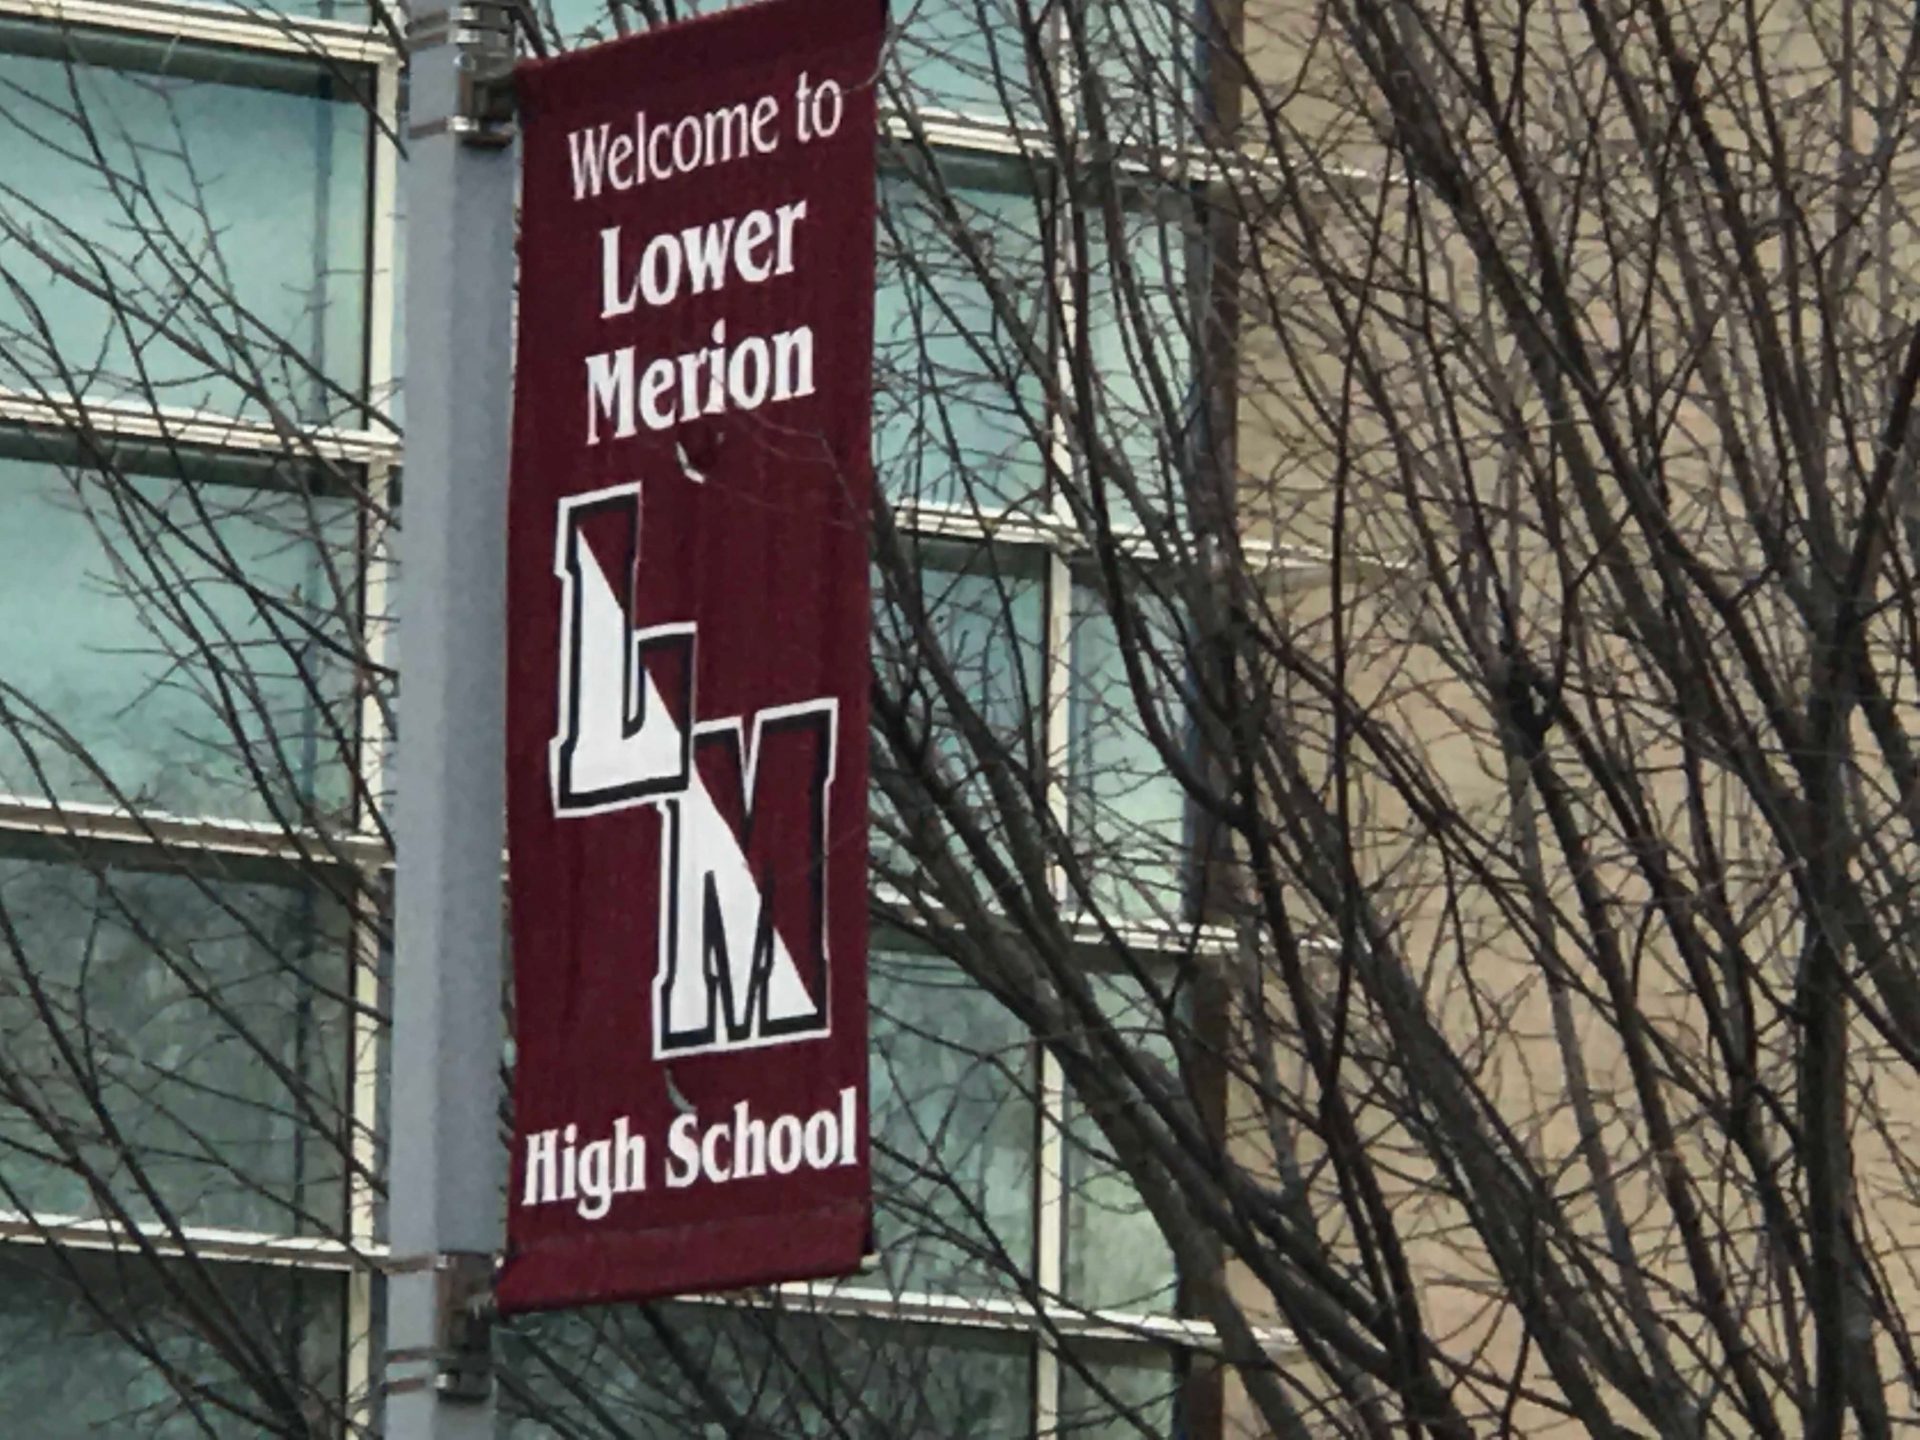 Lower Merion High School in Ardmore, Pa.